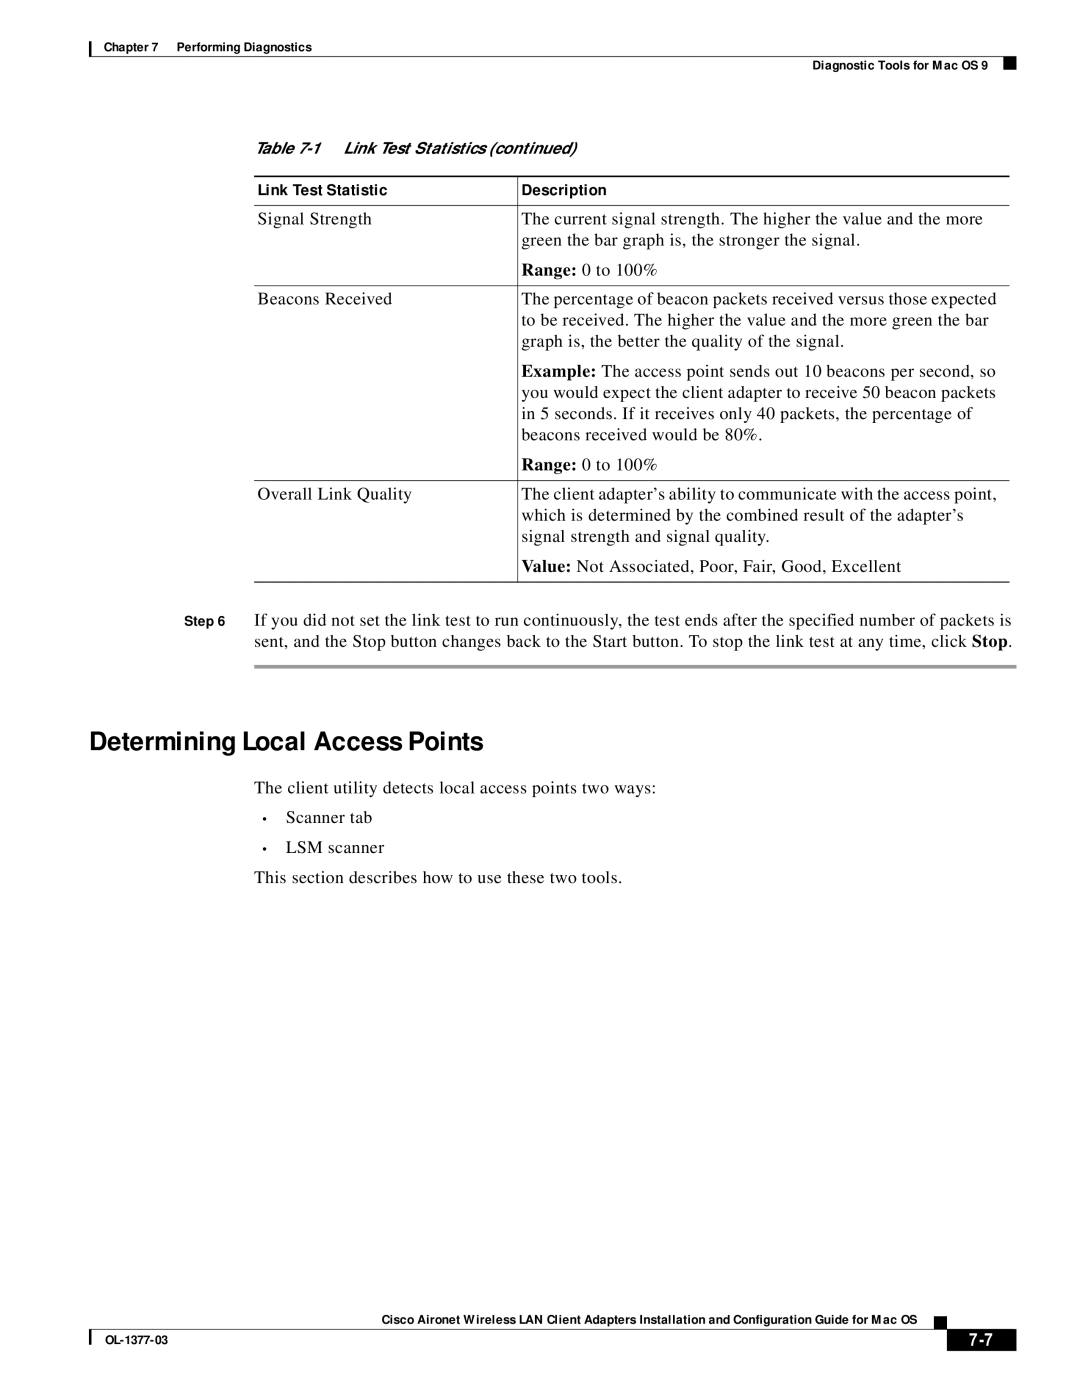 Cisco Systems OL-1377-03 manual Determining Local Access Points, Link Test Statistic, Description 